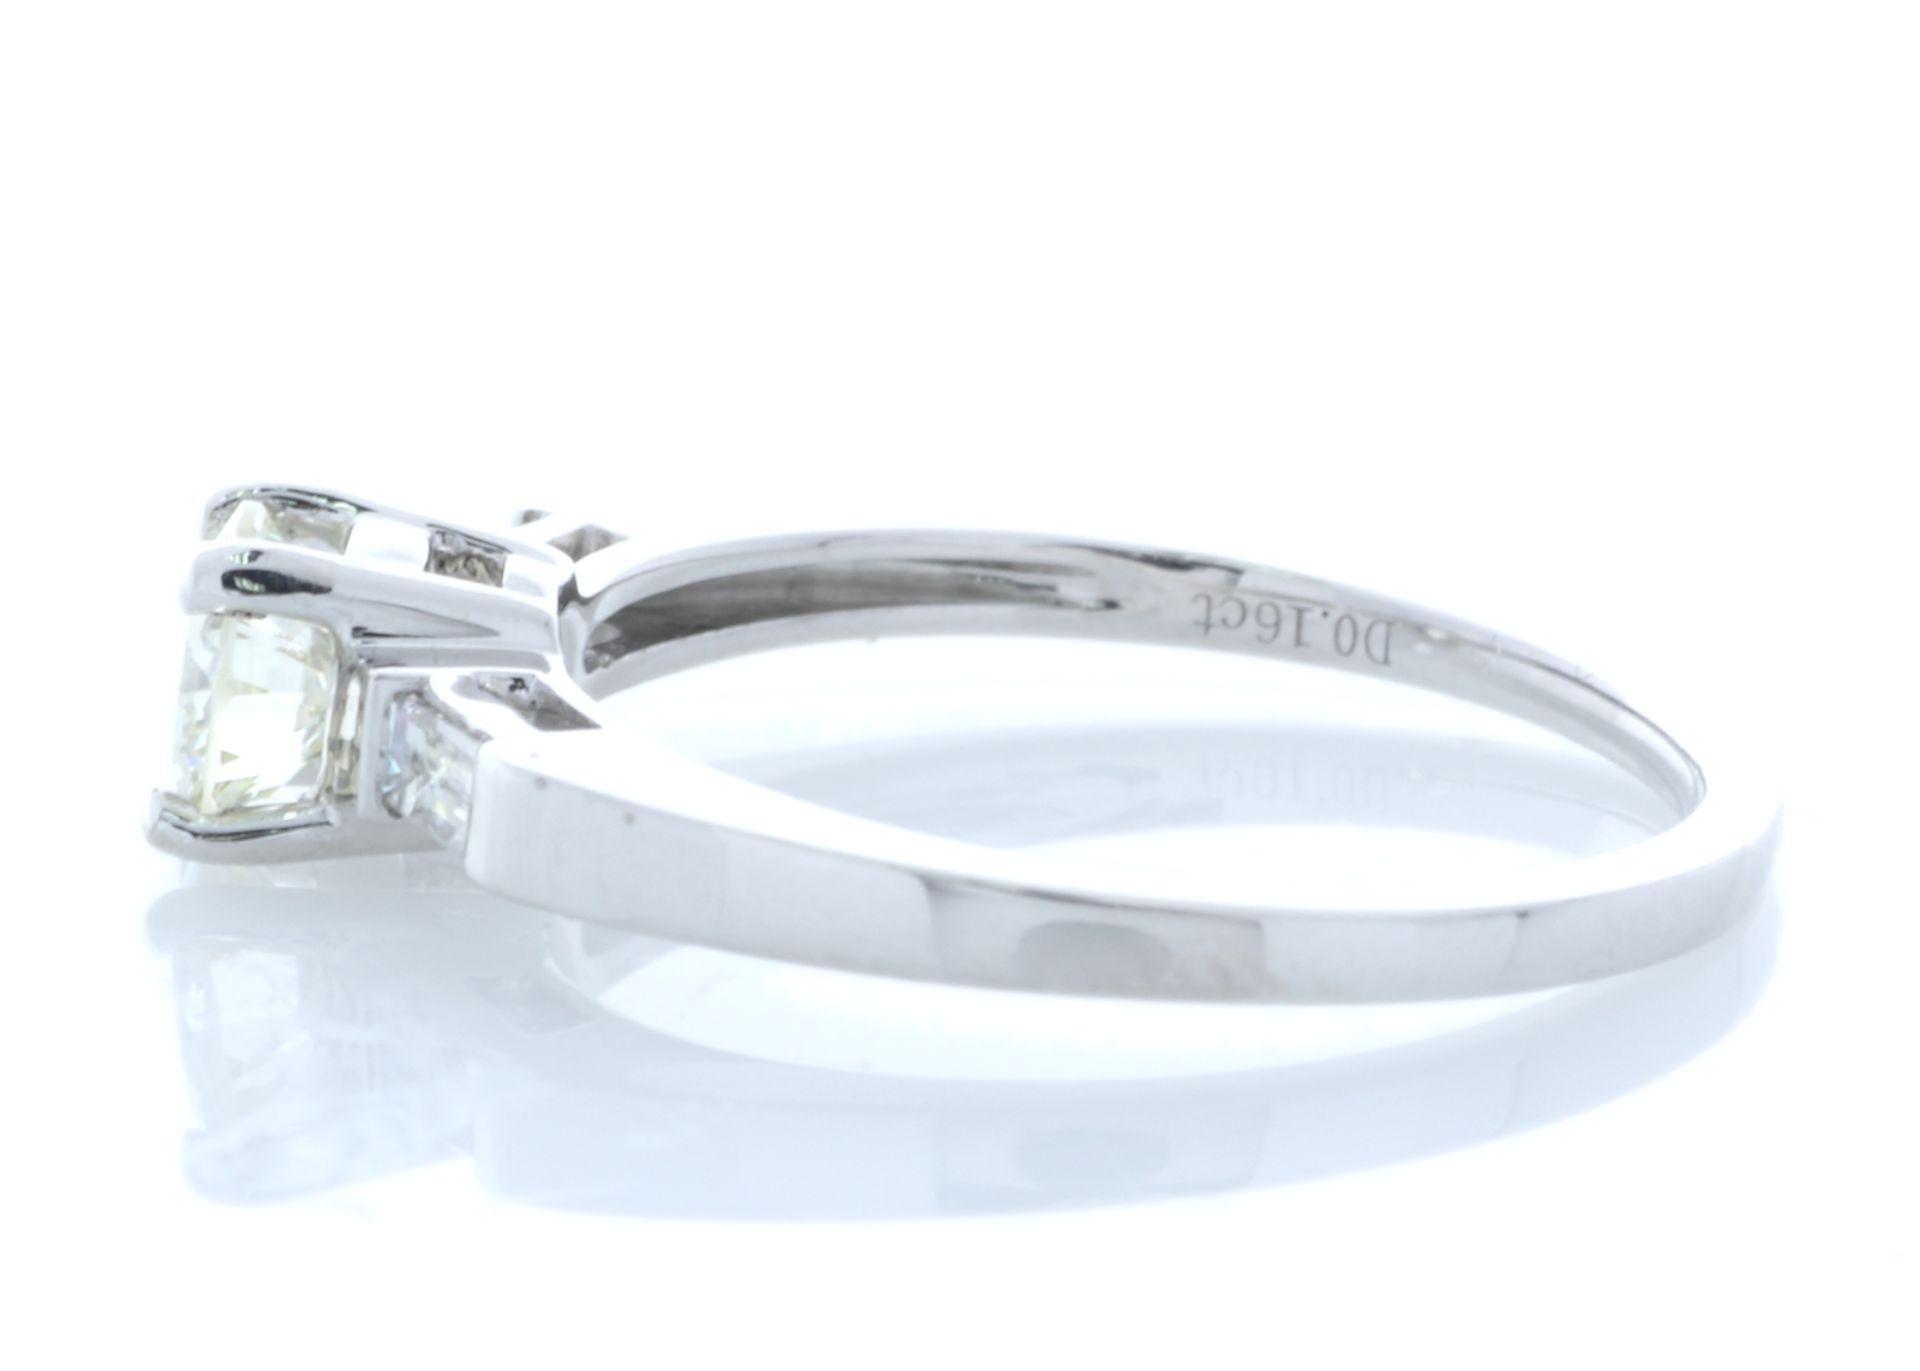 18ct White Gold Baguette Shoulder Set Diamond Ring 0.67 Carats - Valued By GIE £11,140.00 - A - Image 2 of 5